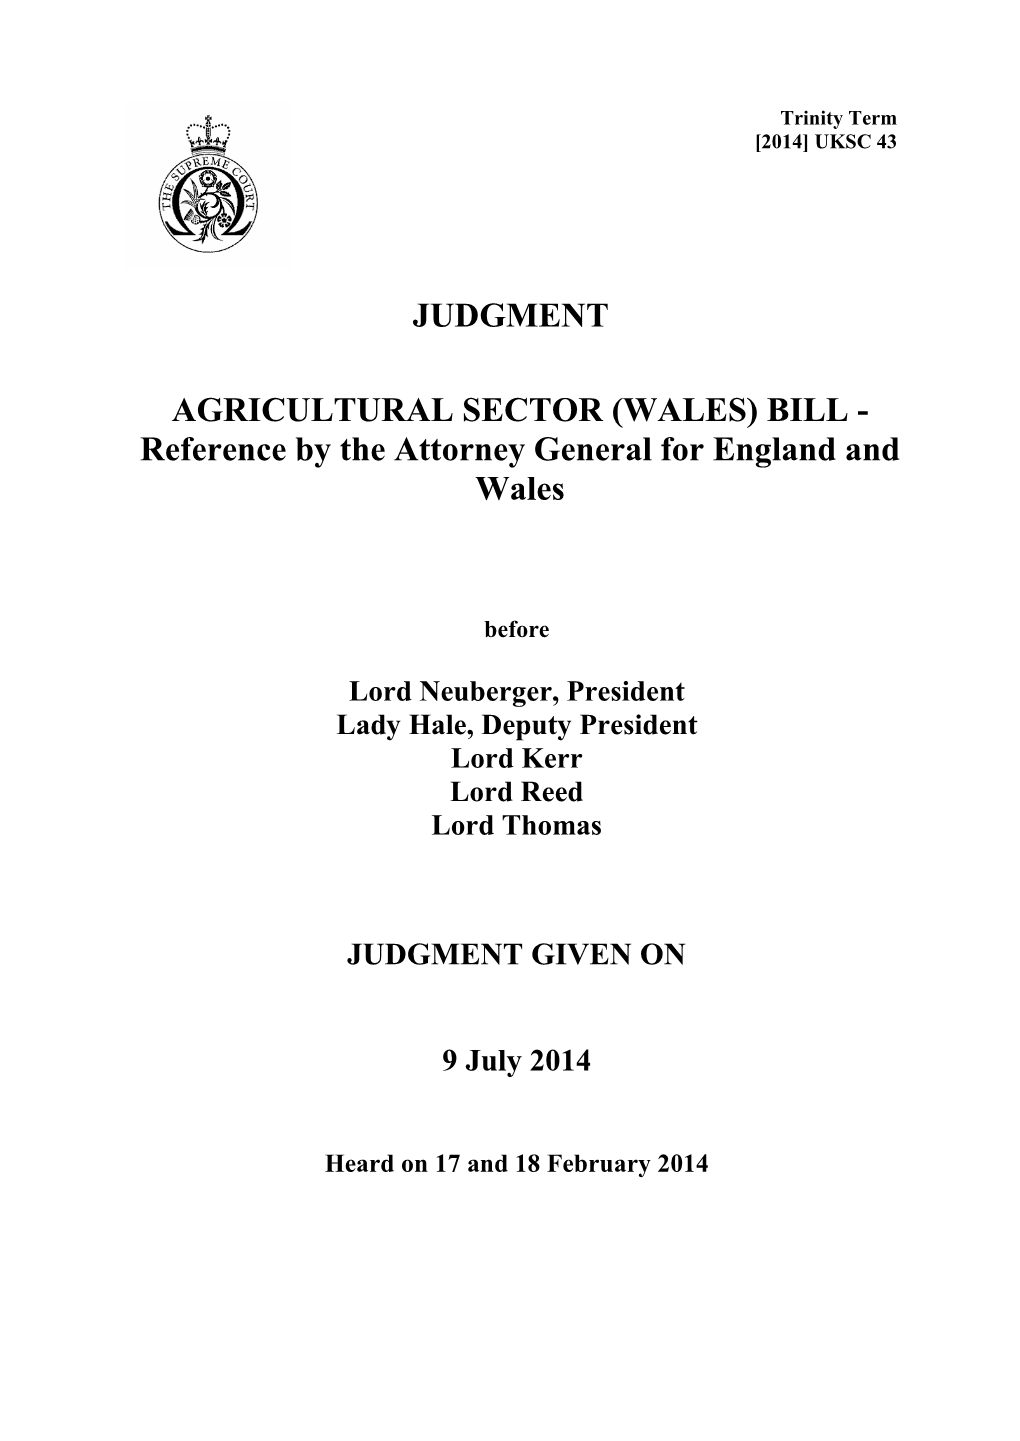 AGRICULTURAL SECTOR (WALES) BILL - Reference by the Attorney General for England and Wales